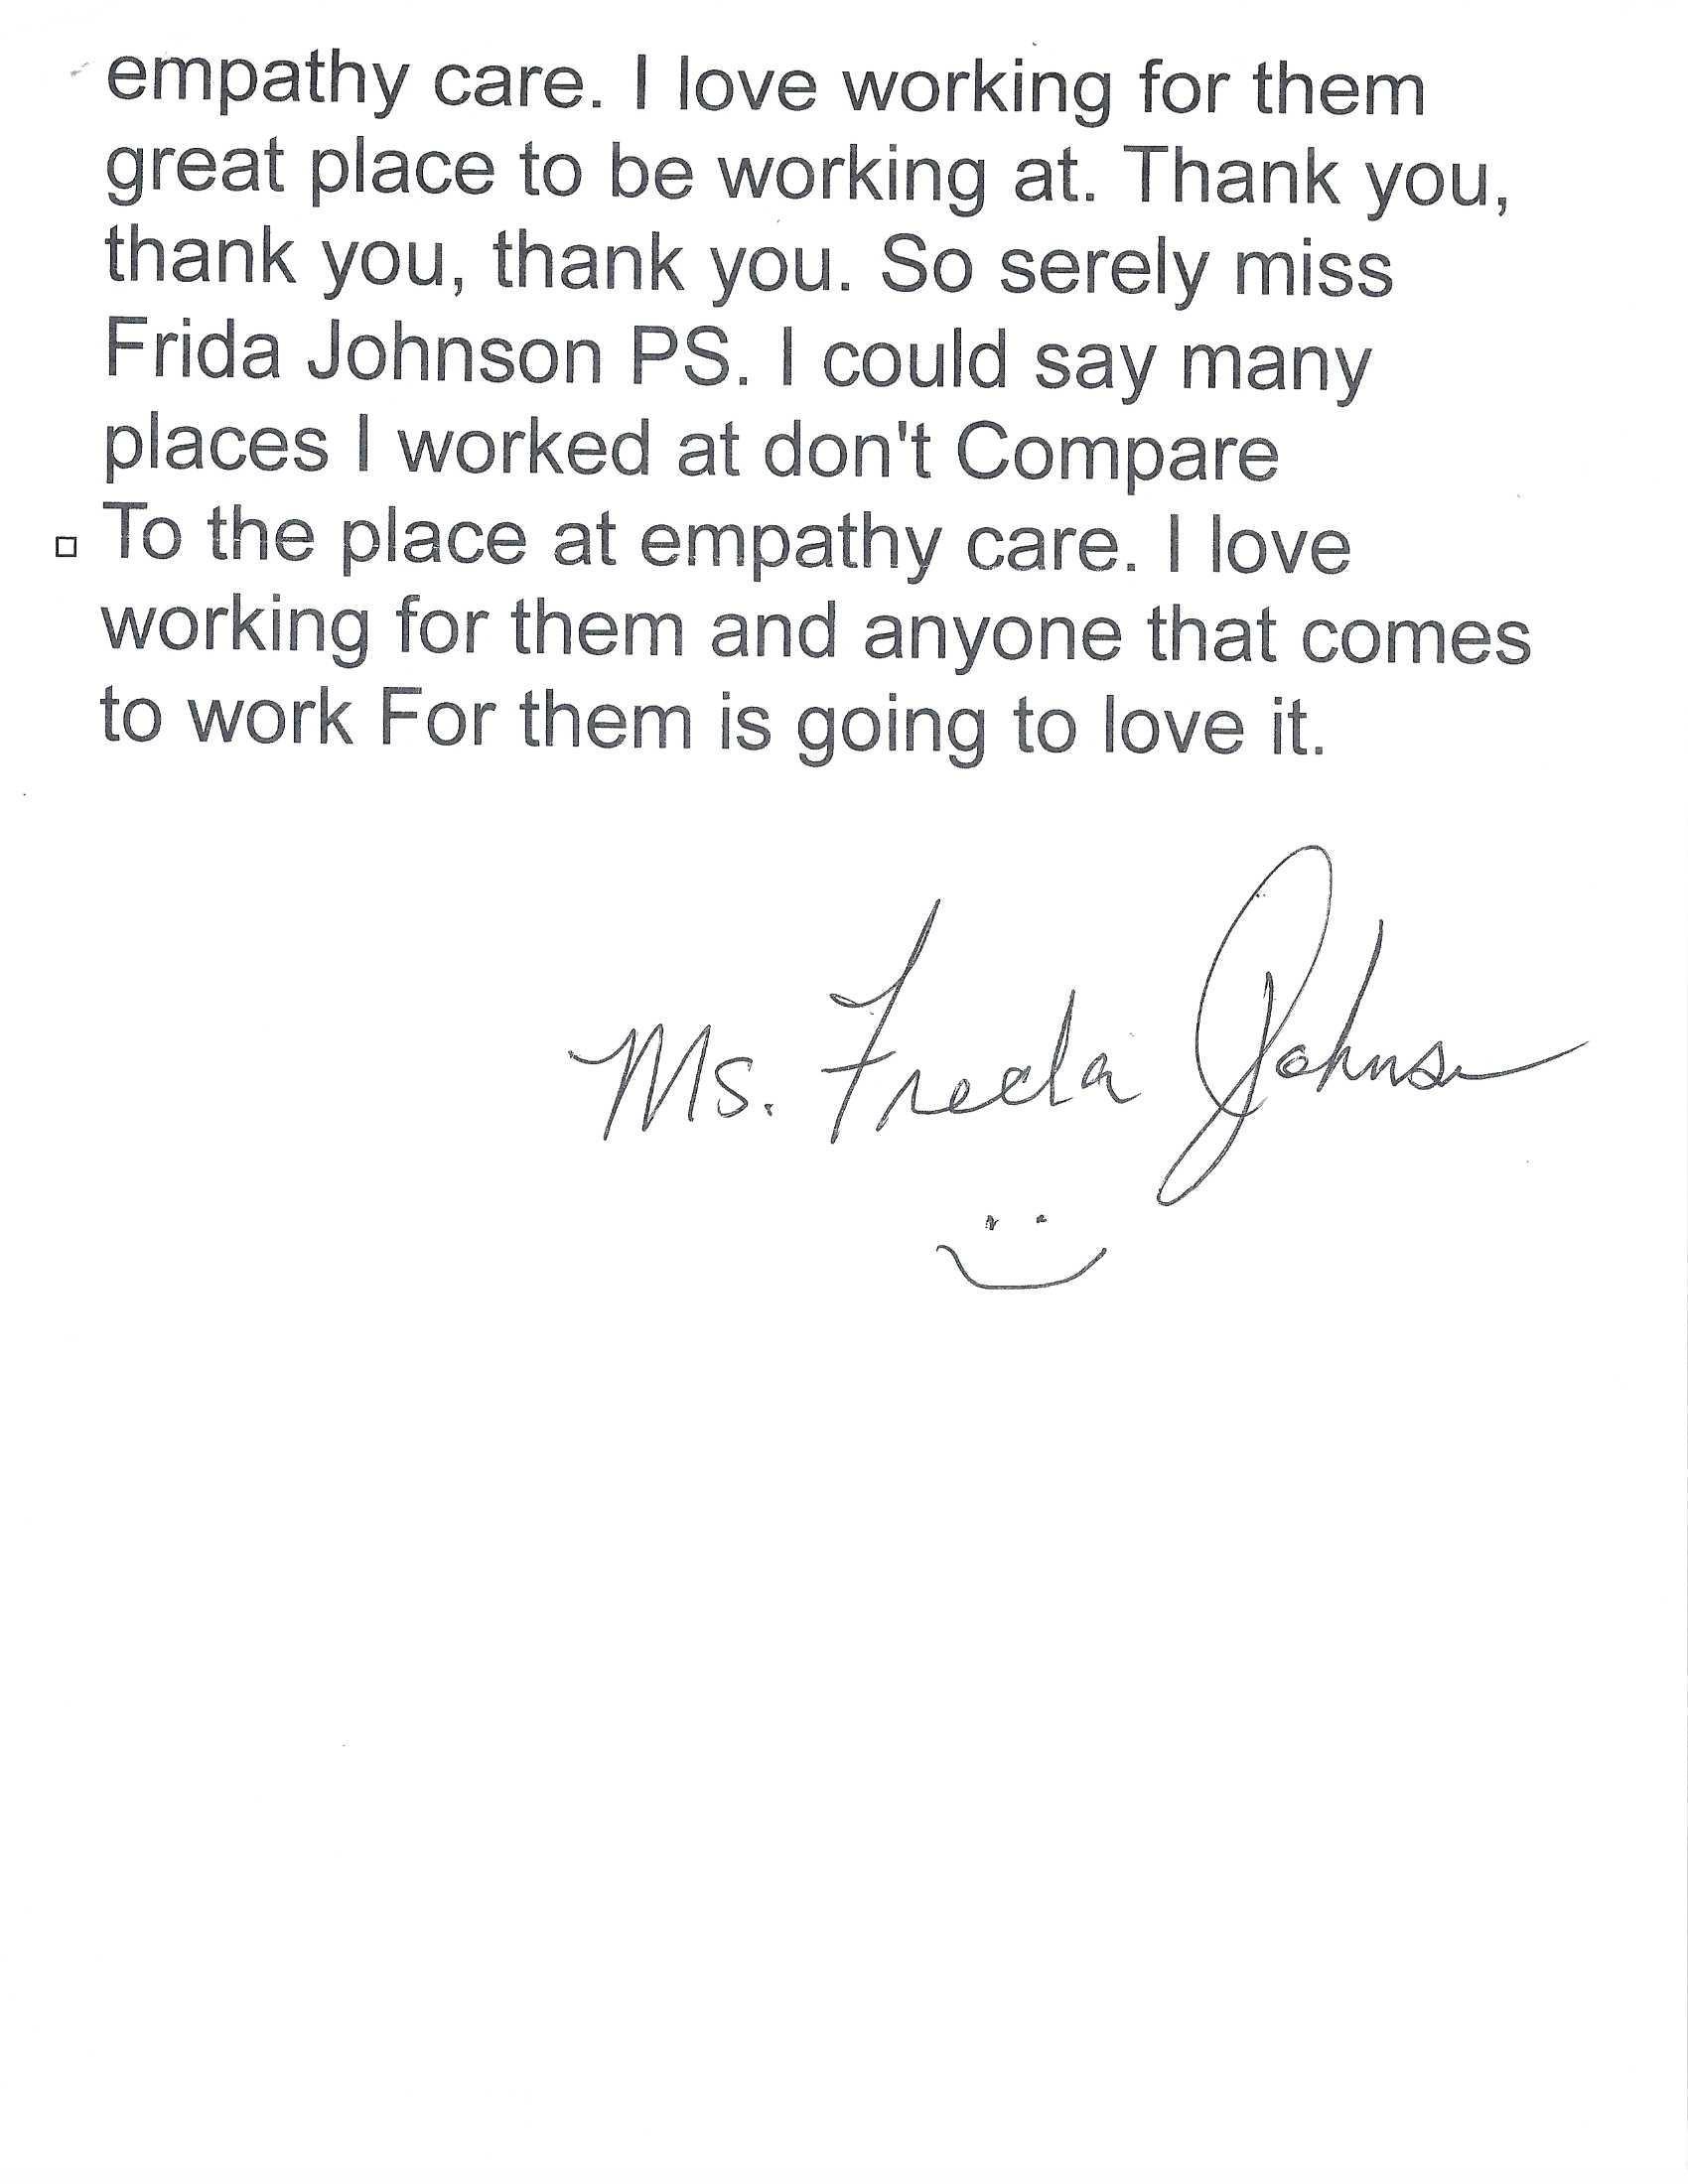 Letters of Recommendation - Empathy Care 2023 (1)_Page_10